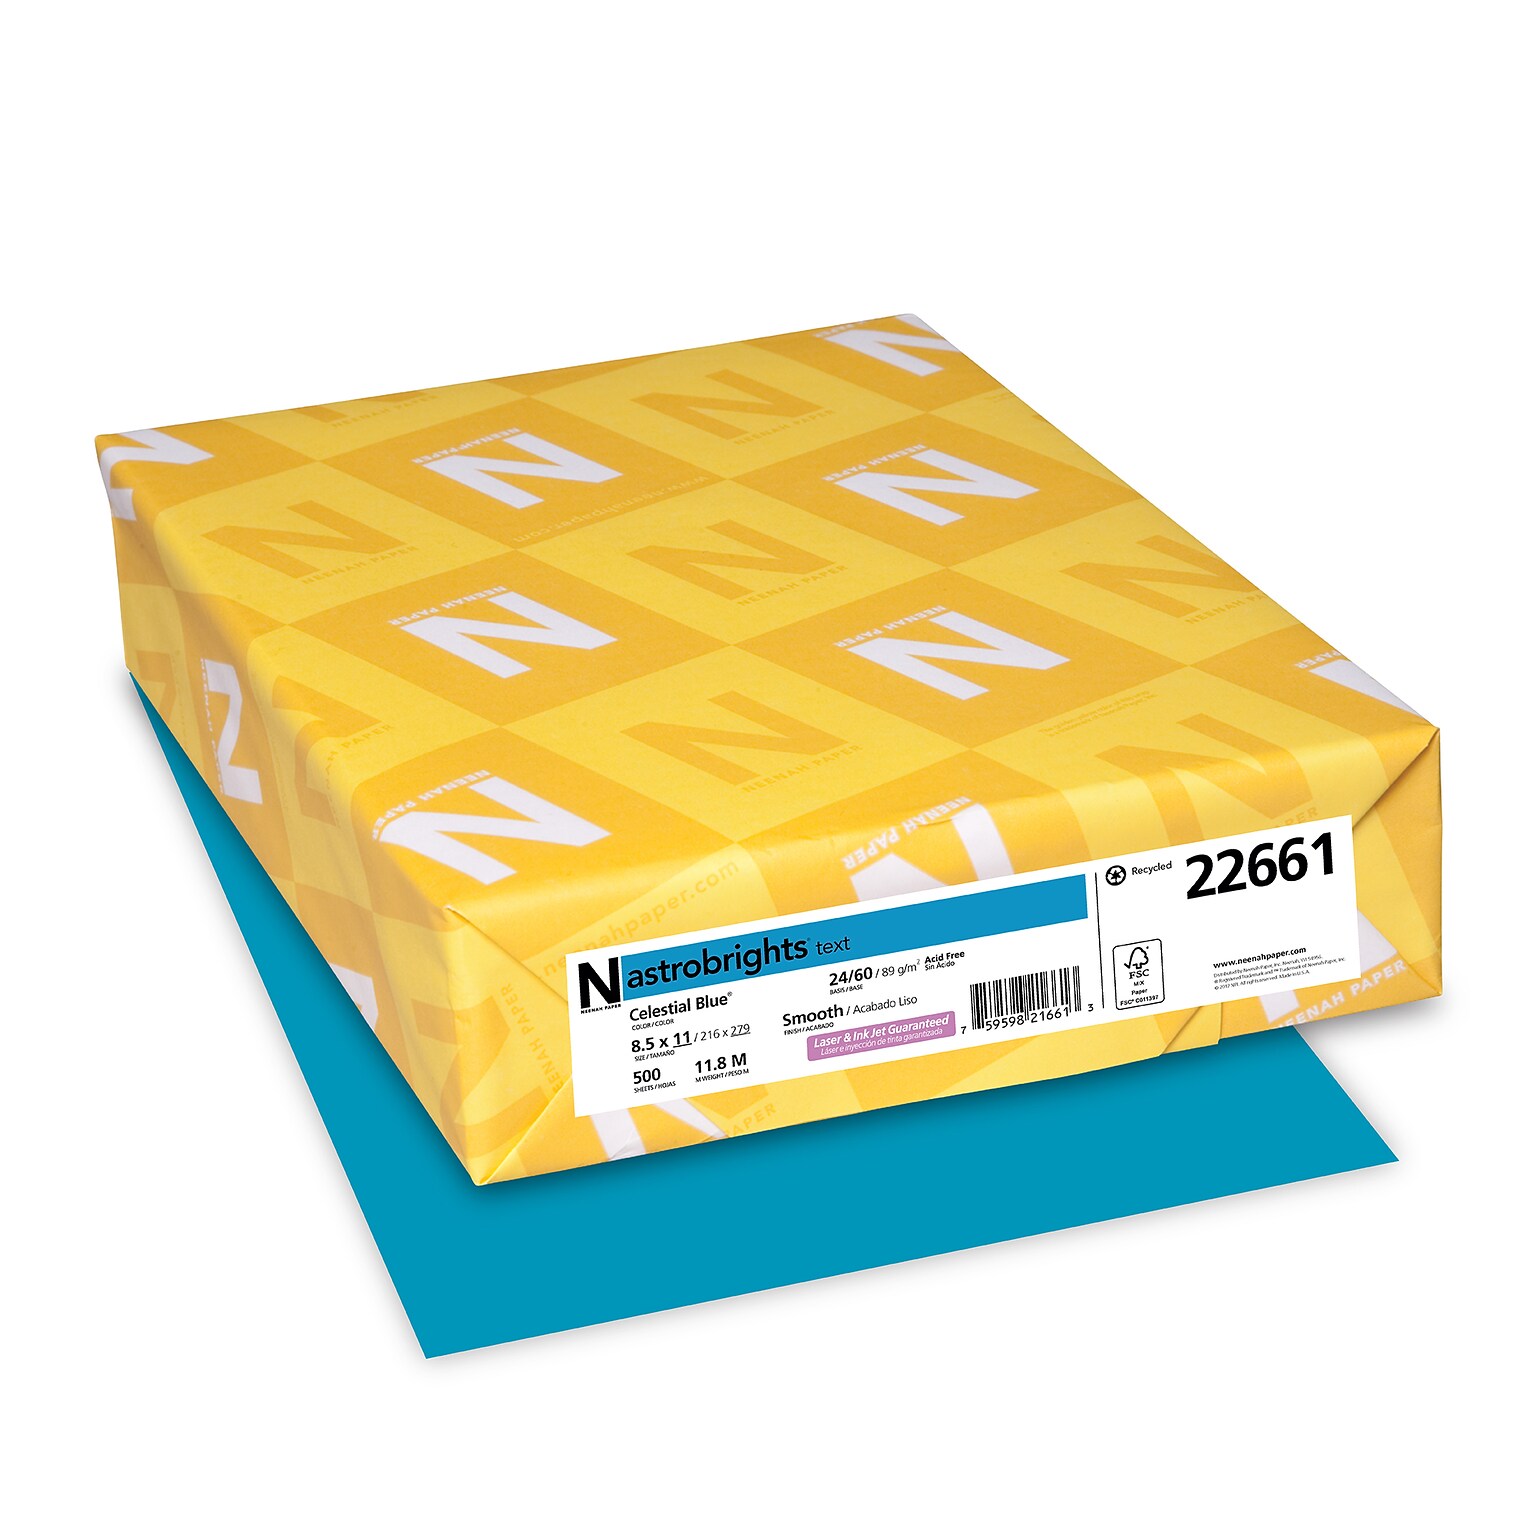 Astrobrights 30% Recycled Colored Paper, 24 lbs., 8.5 x 11, Celestial Blue, 500 Sheets/Ream (22661)